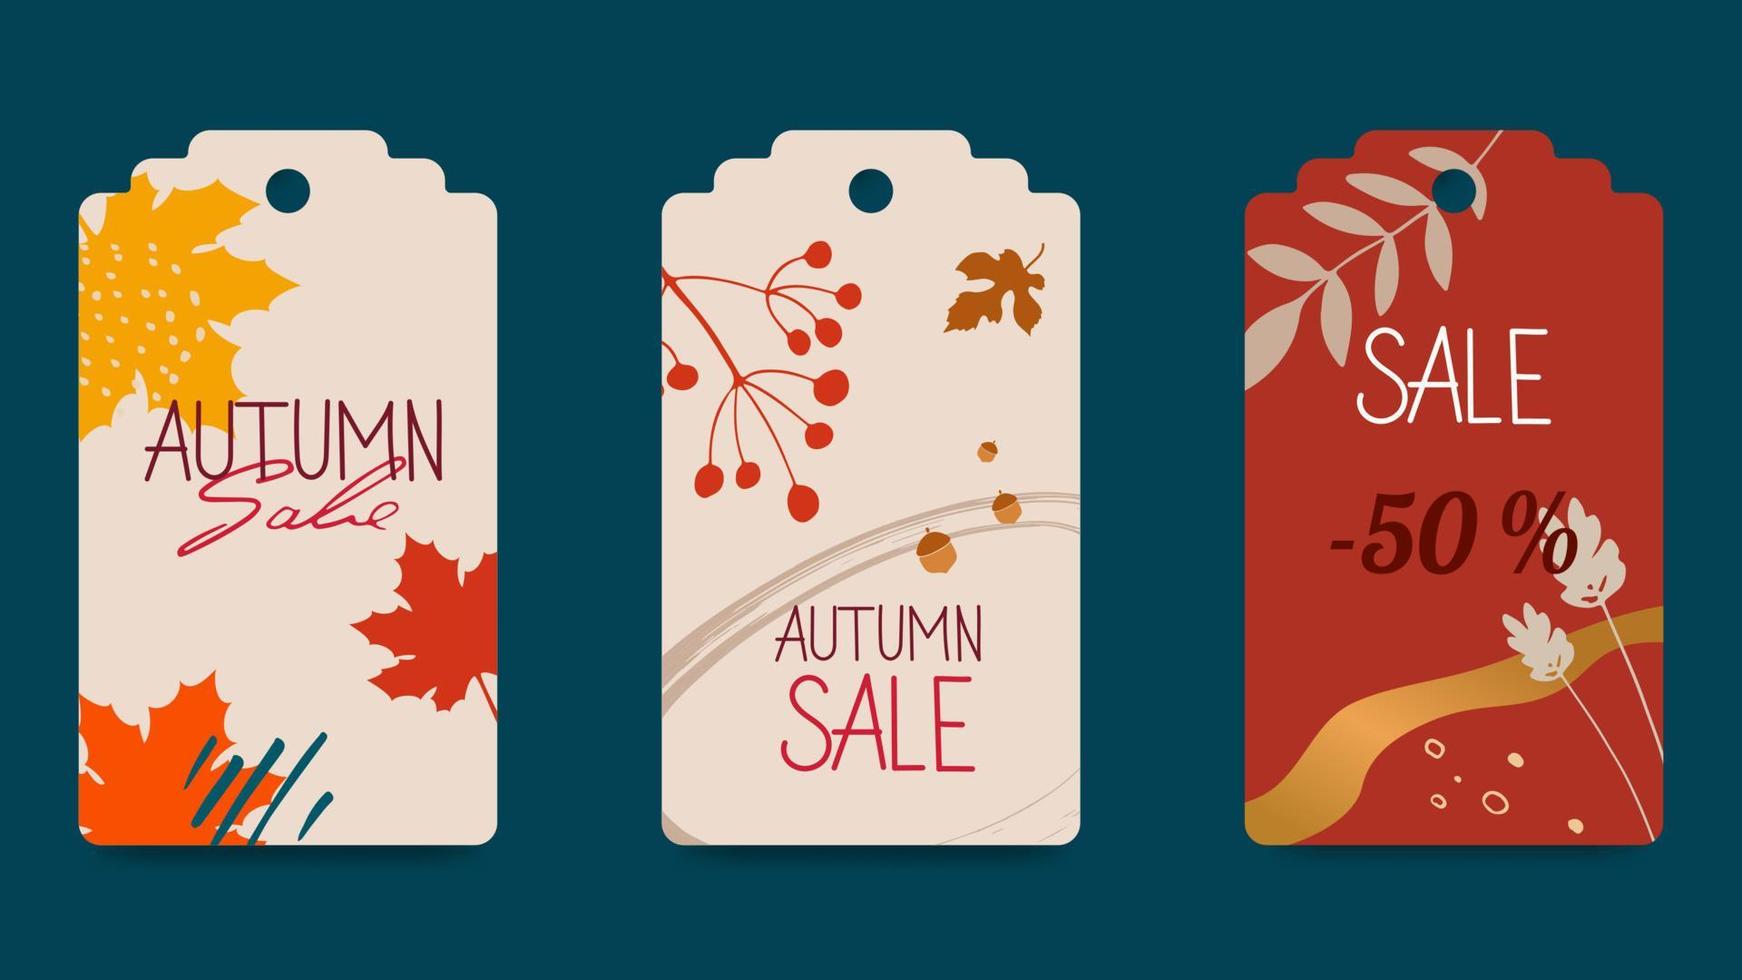 Set of abstract autumn gift tags. Leaves, berries shapes, strokes, individual elements. Seasonal label templates for printing. For Thanksgiving, birthday, Christmas gifts. Vector images